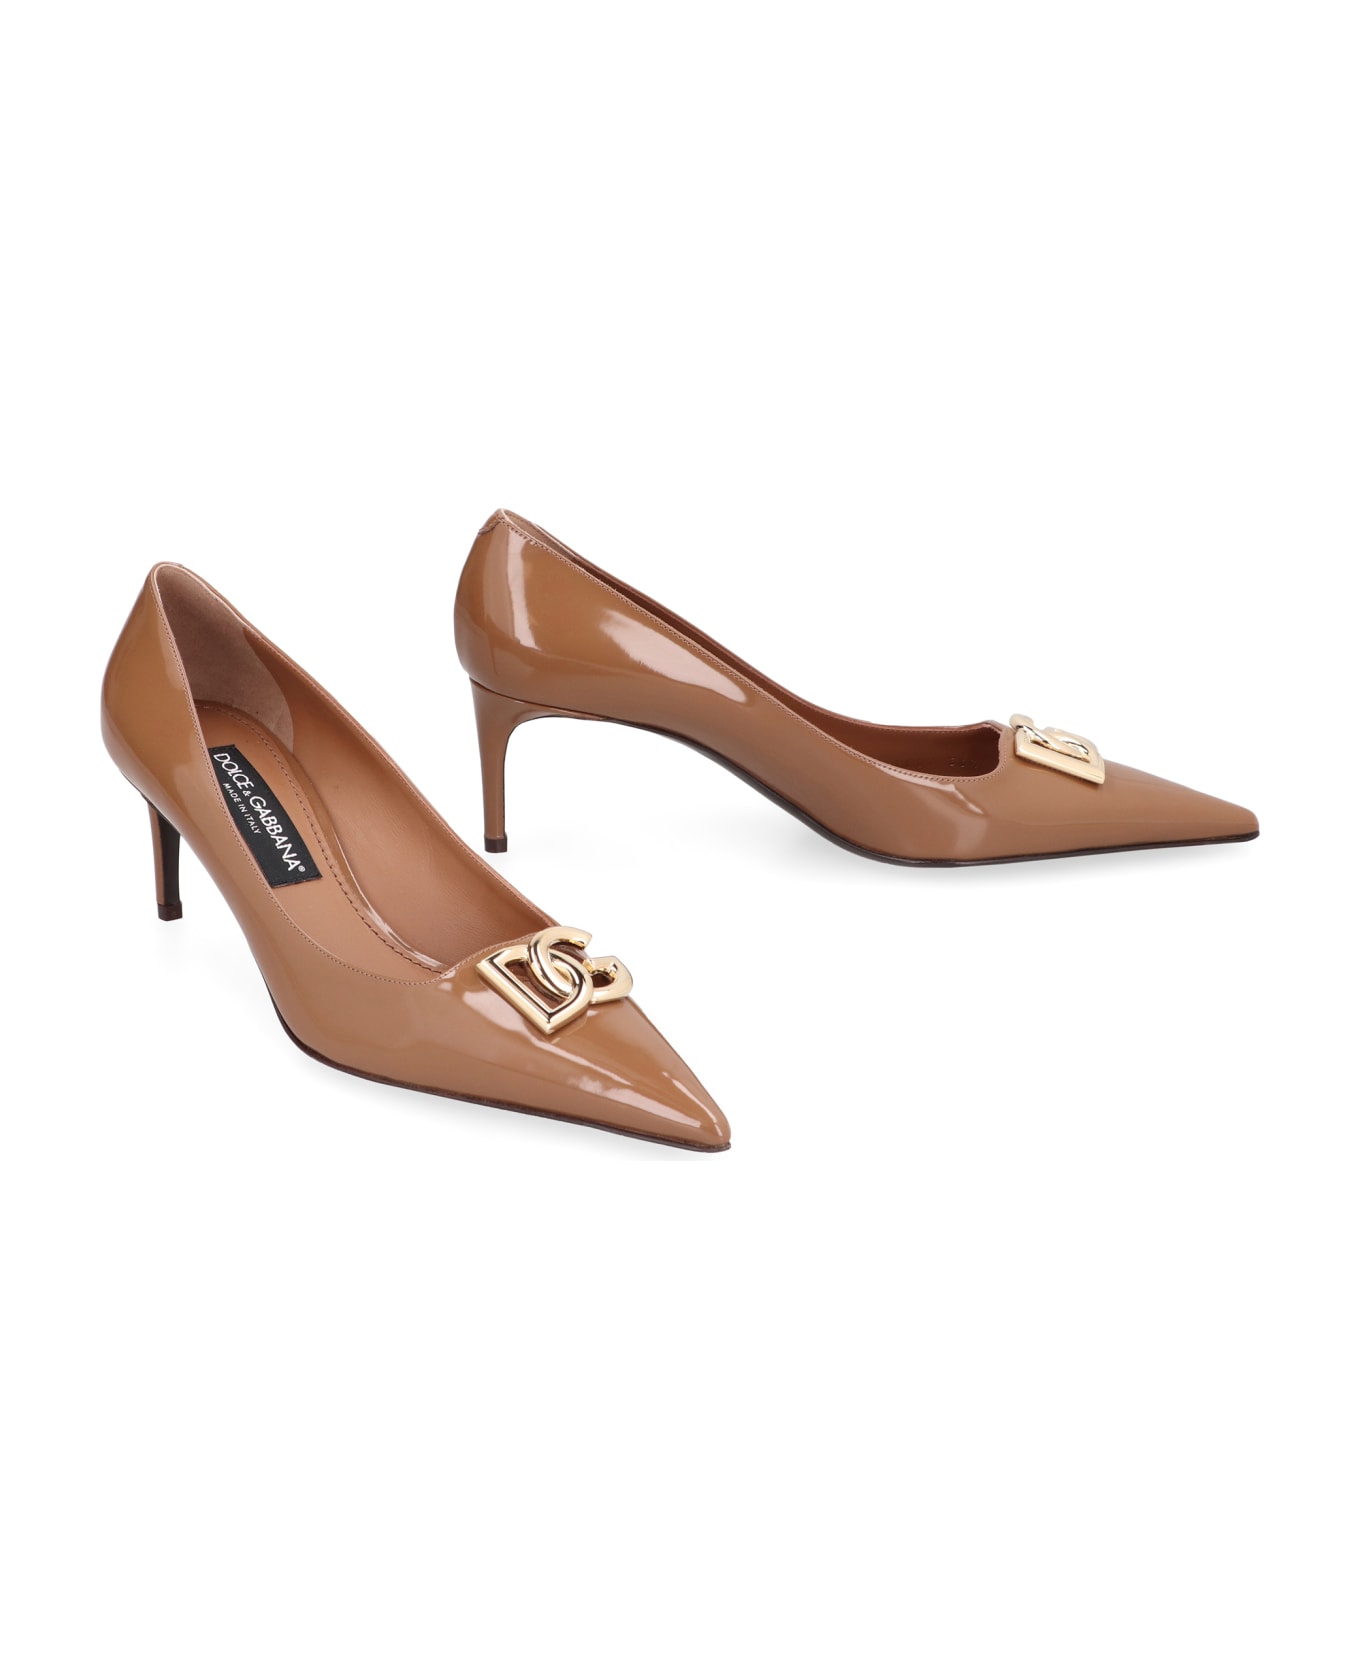 Dolce & Gabbana Leather Pumps - brown